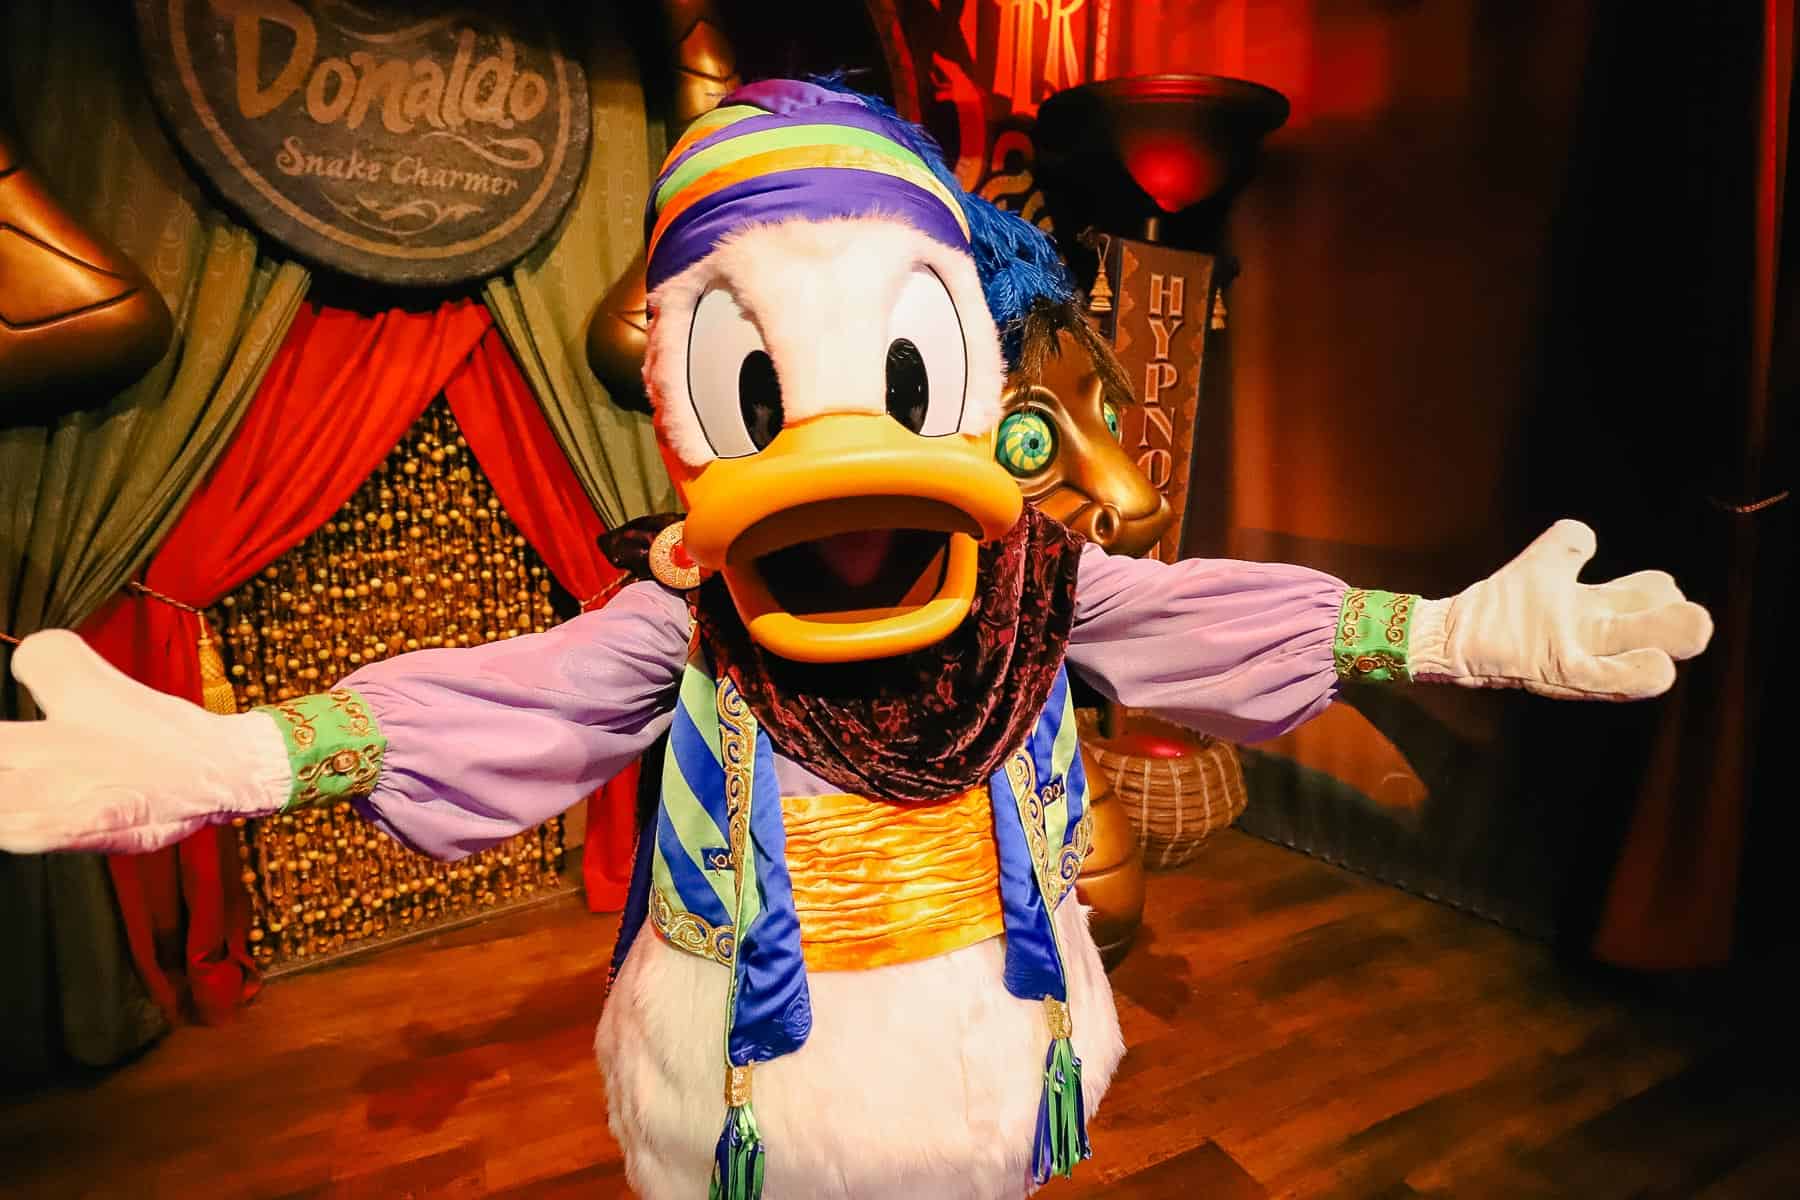 Donald with his arms wide